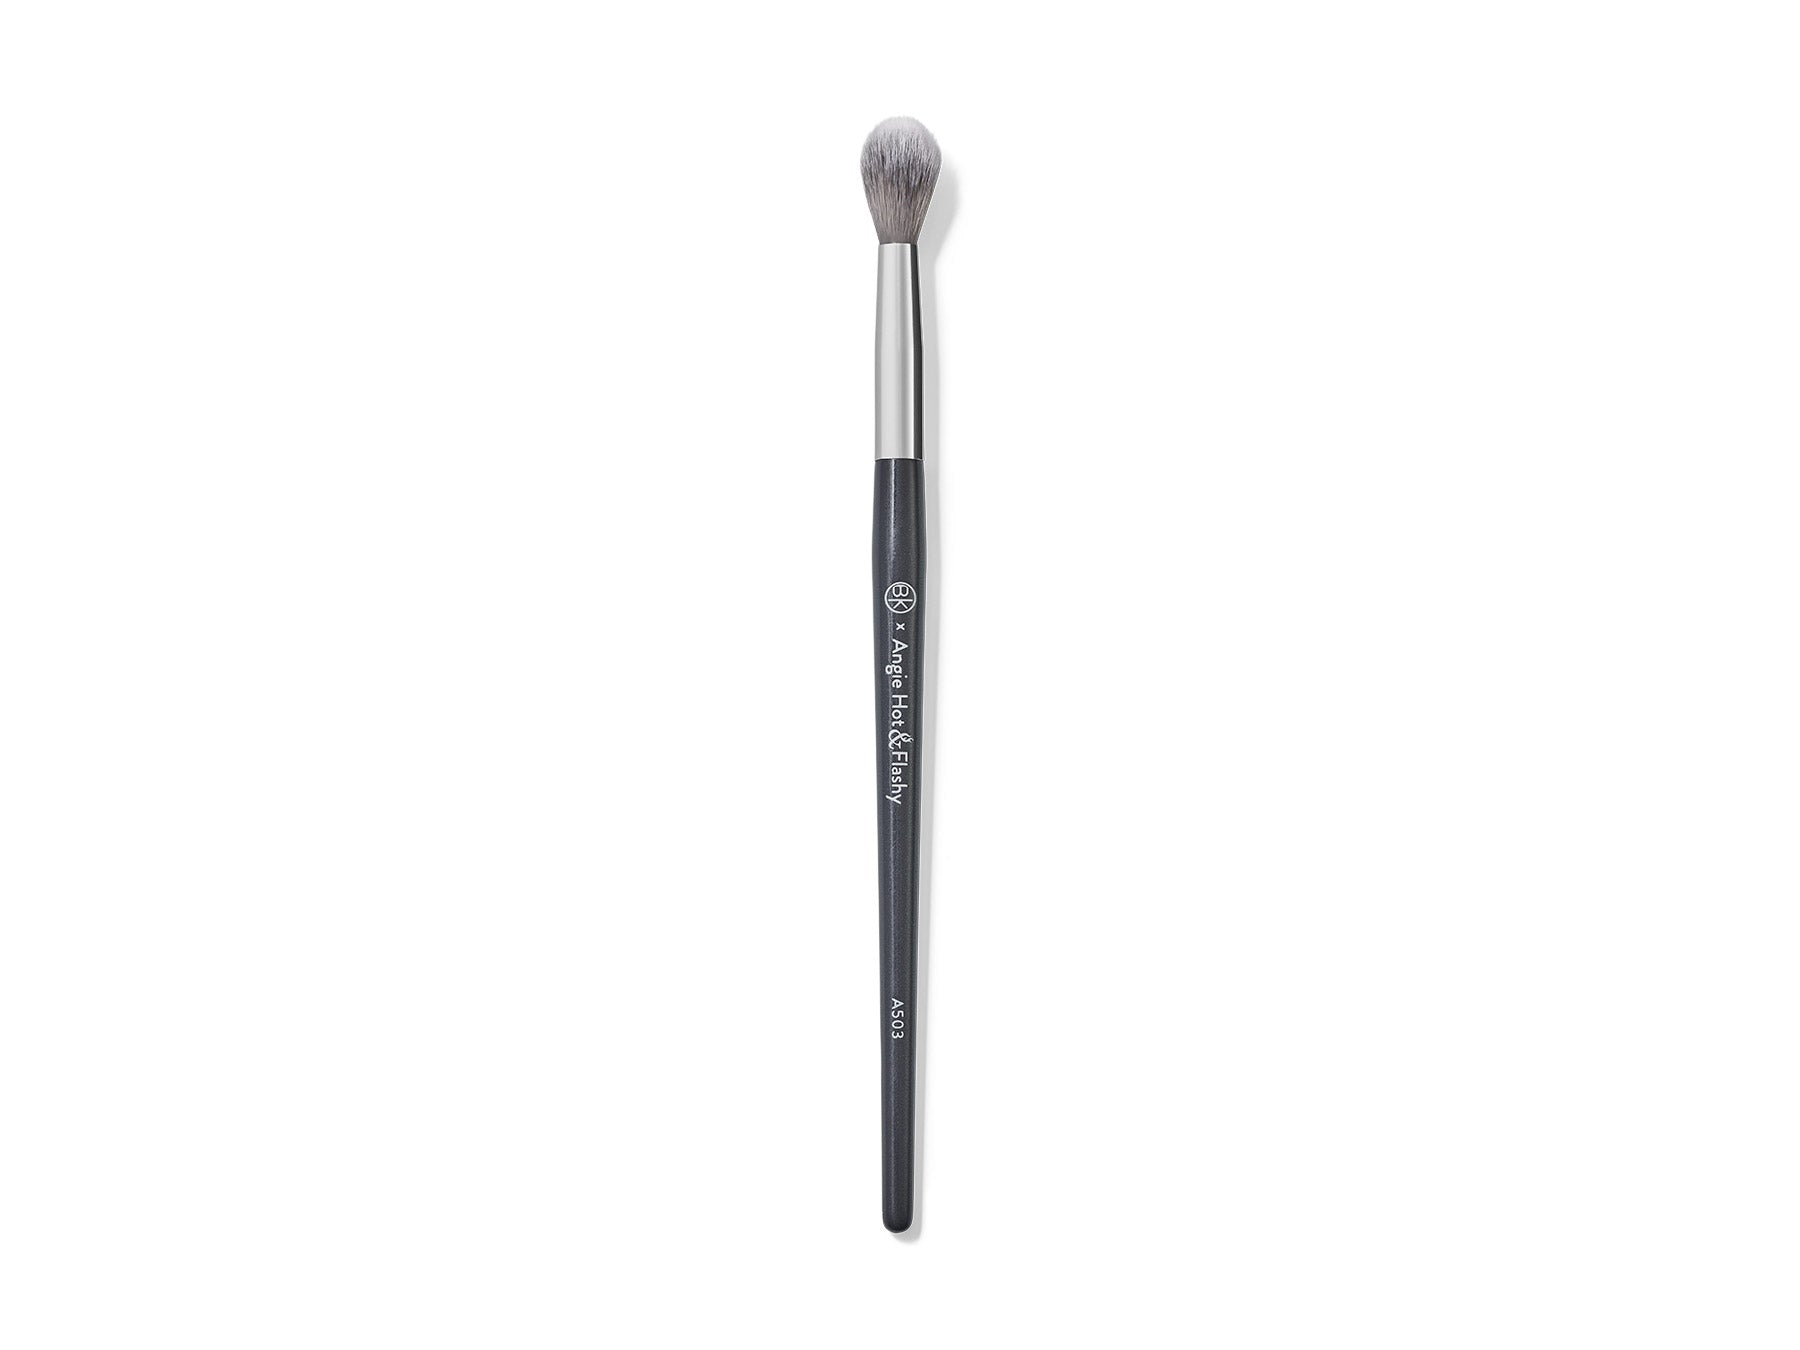 BK Beauty x Angie Hot & Flashy - A506 Concealer Brush